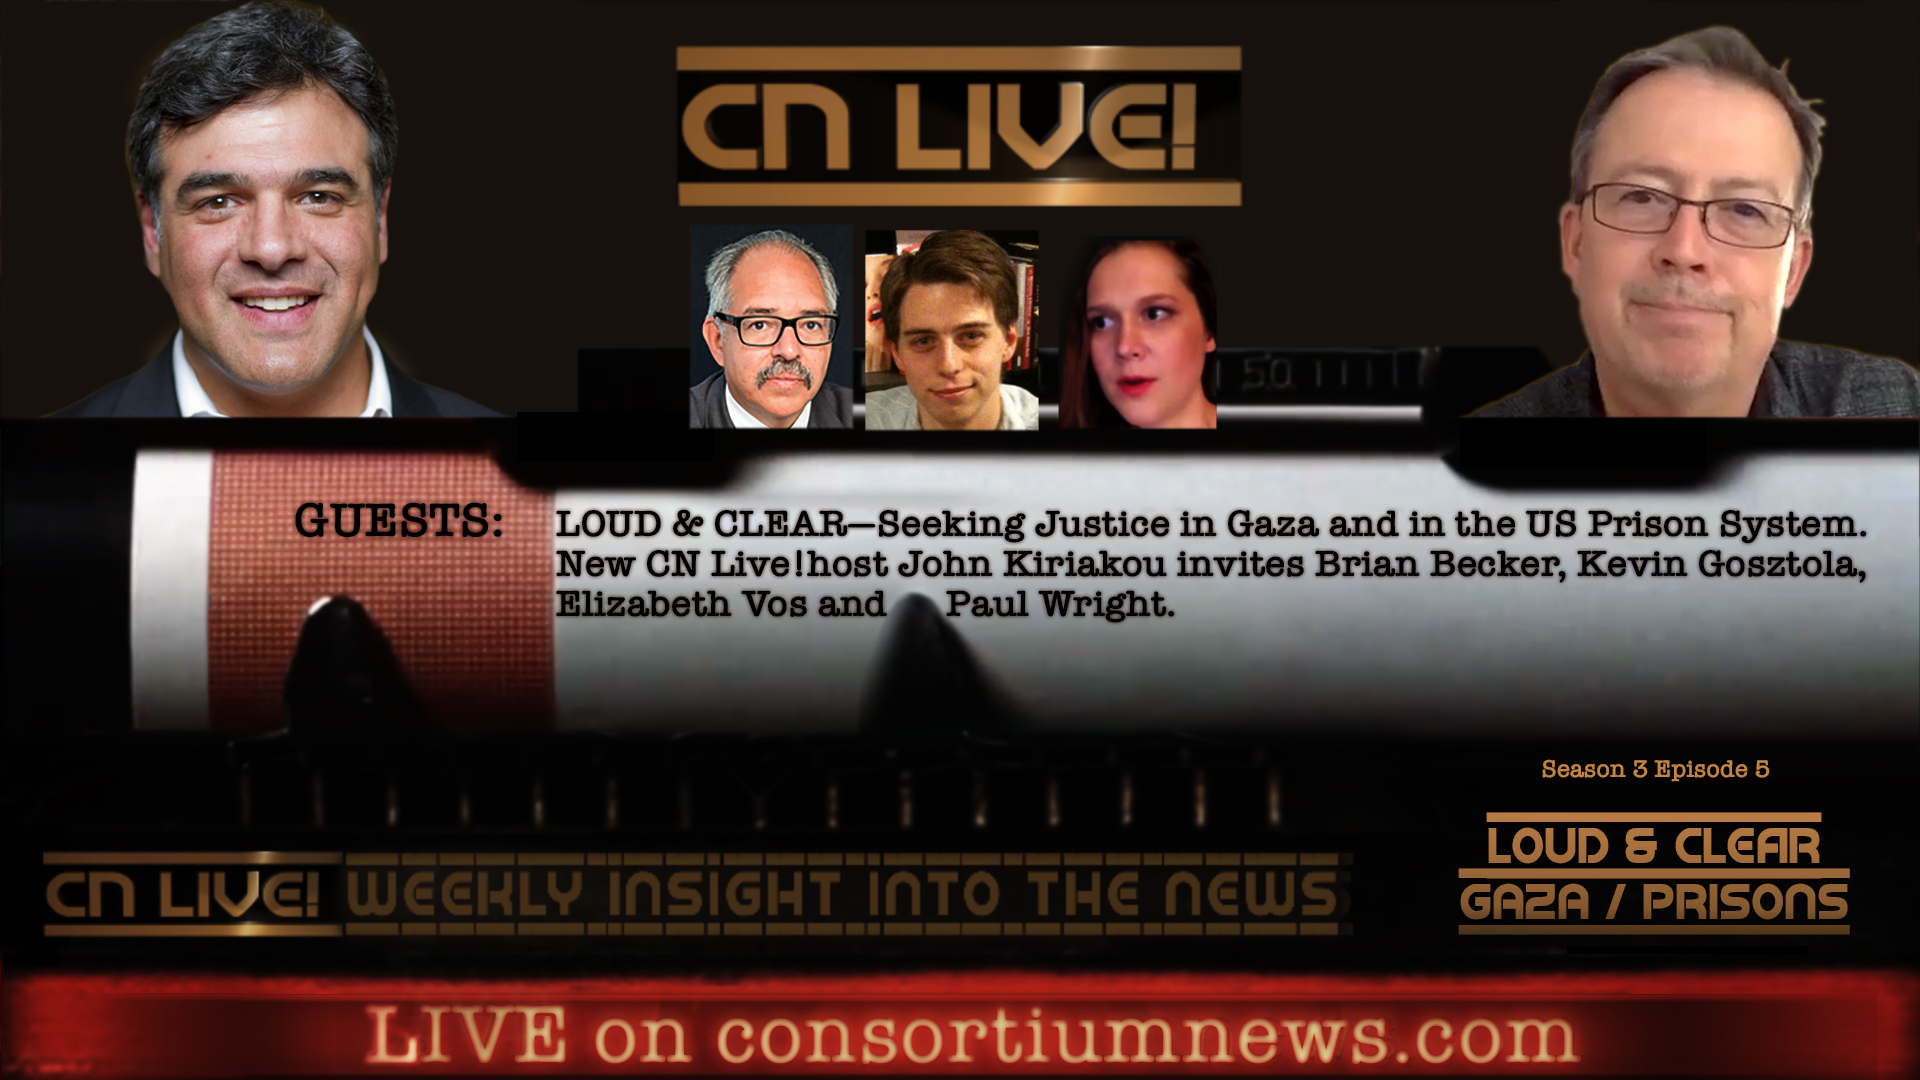 WATCH: CN Live! — New Episode — John Kiriakou’s First Show: On Justice in Gaza & US Prisons